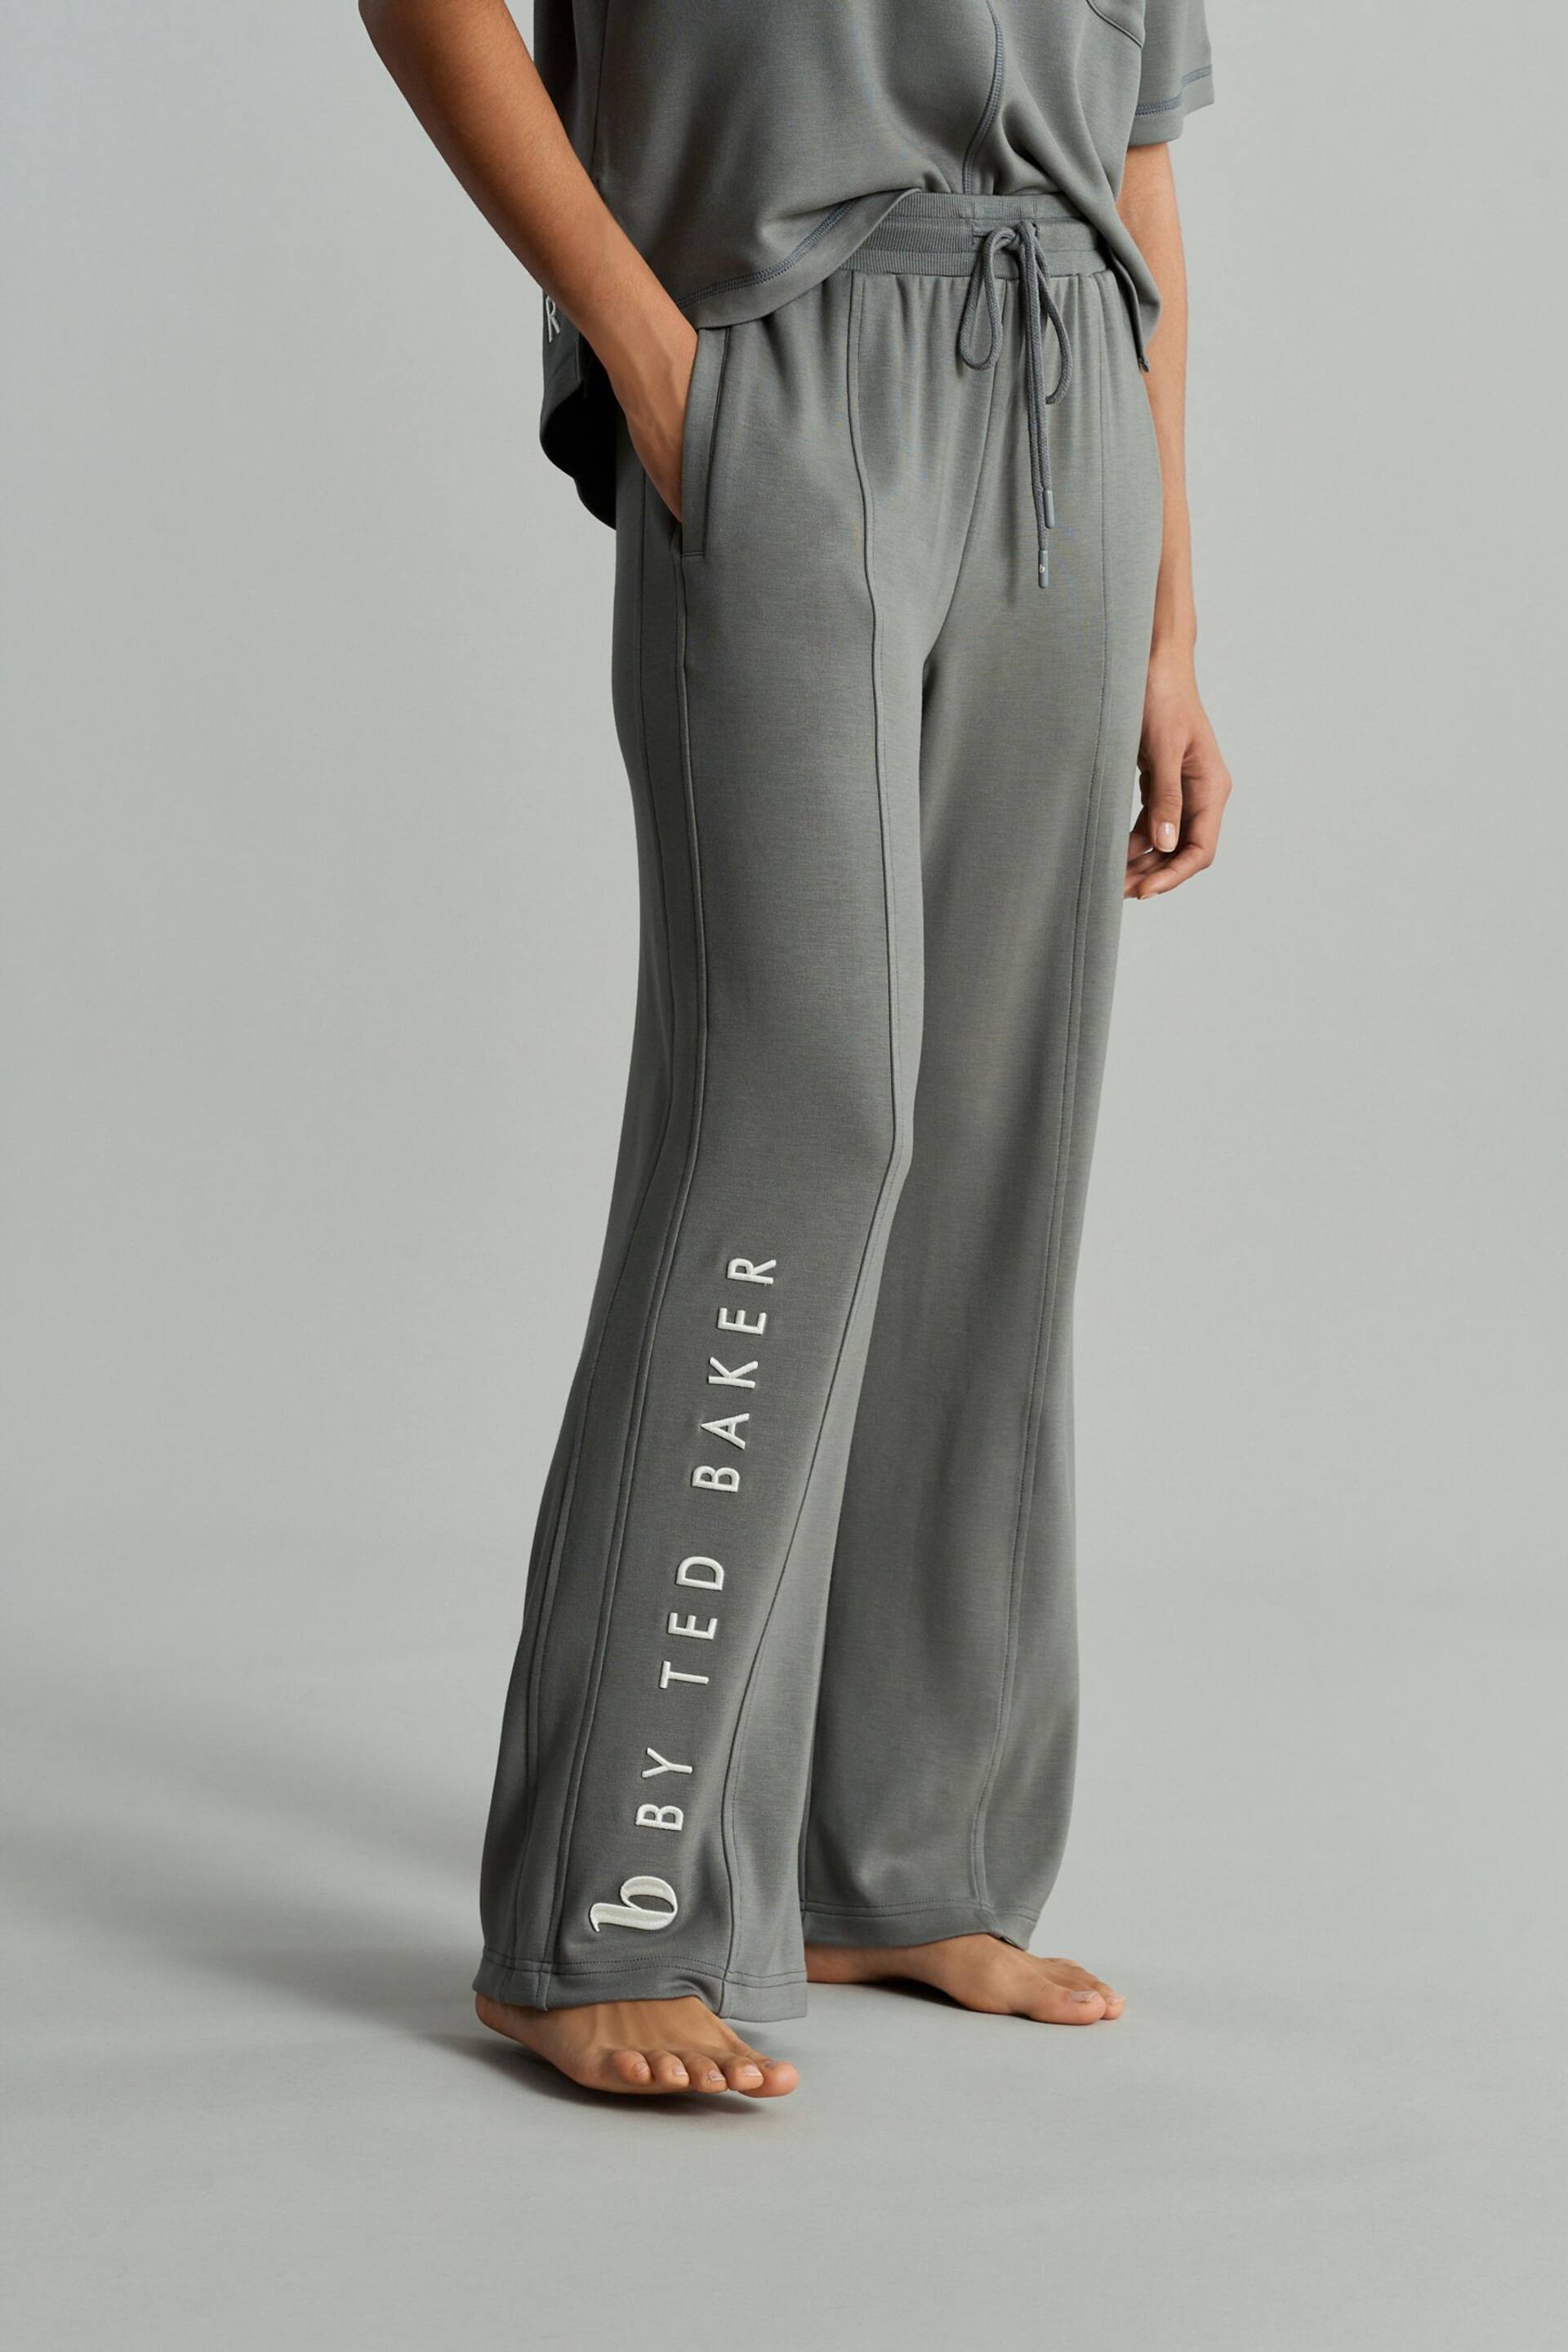 B by Ted Baker Jersey Viscose Wide Leg Trousers - Image 4 of 17